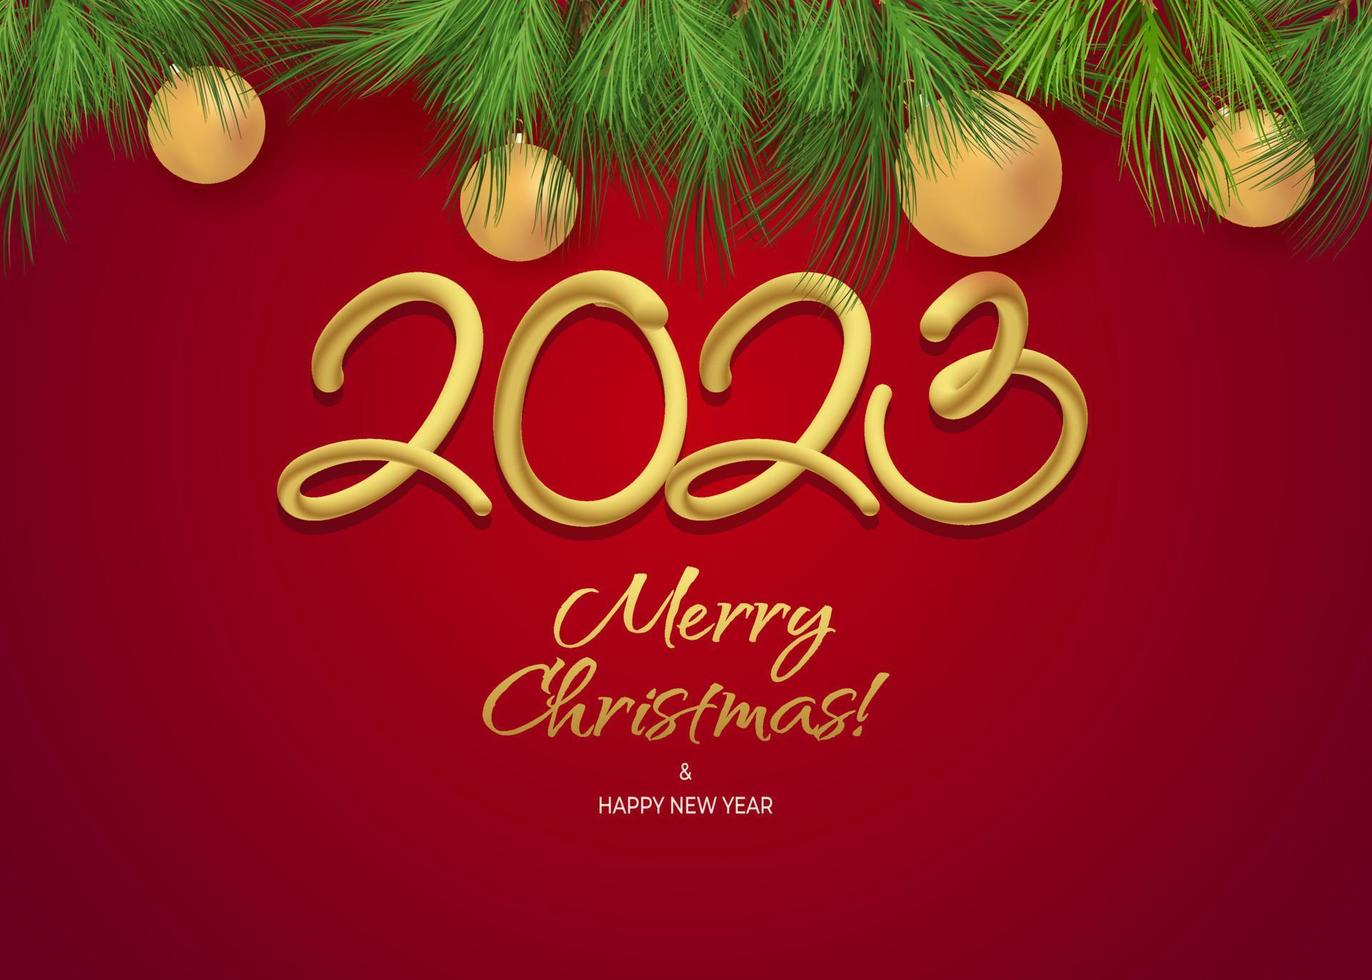 Happy new year 3d 2023 greeting wallpaper vector template. Merry Christmas design greeting text with christmas decor elements such as a fir tree branch with balls on a red background with luxury gold.